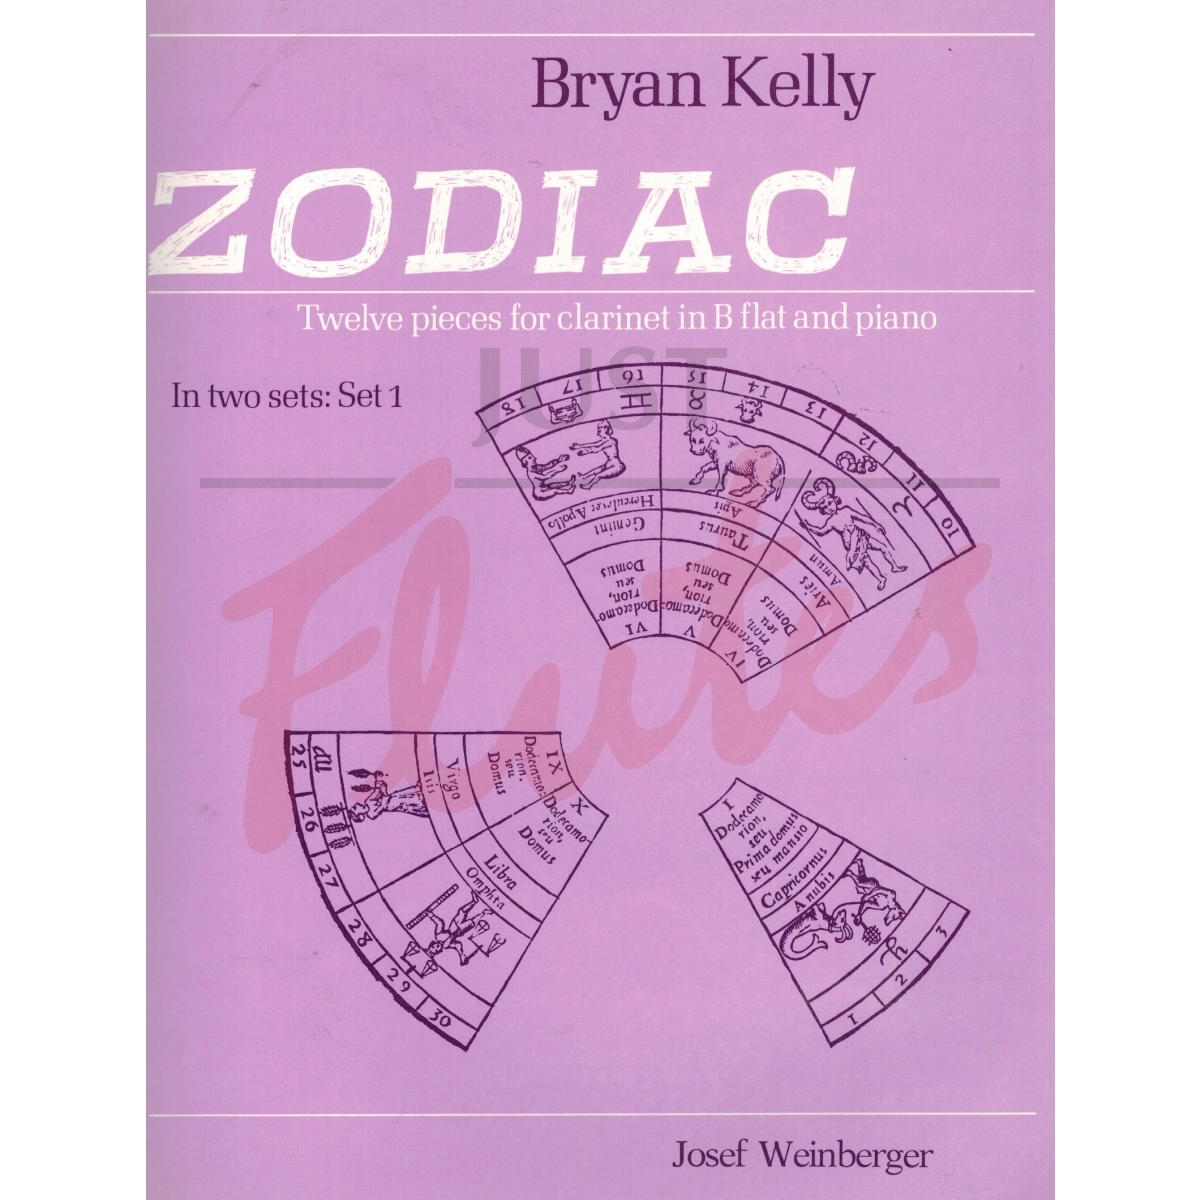 Zodiac Set 1 - 12 Pieces for Clarinet and Piano in two sets